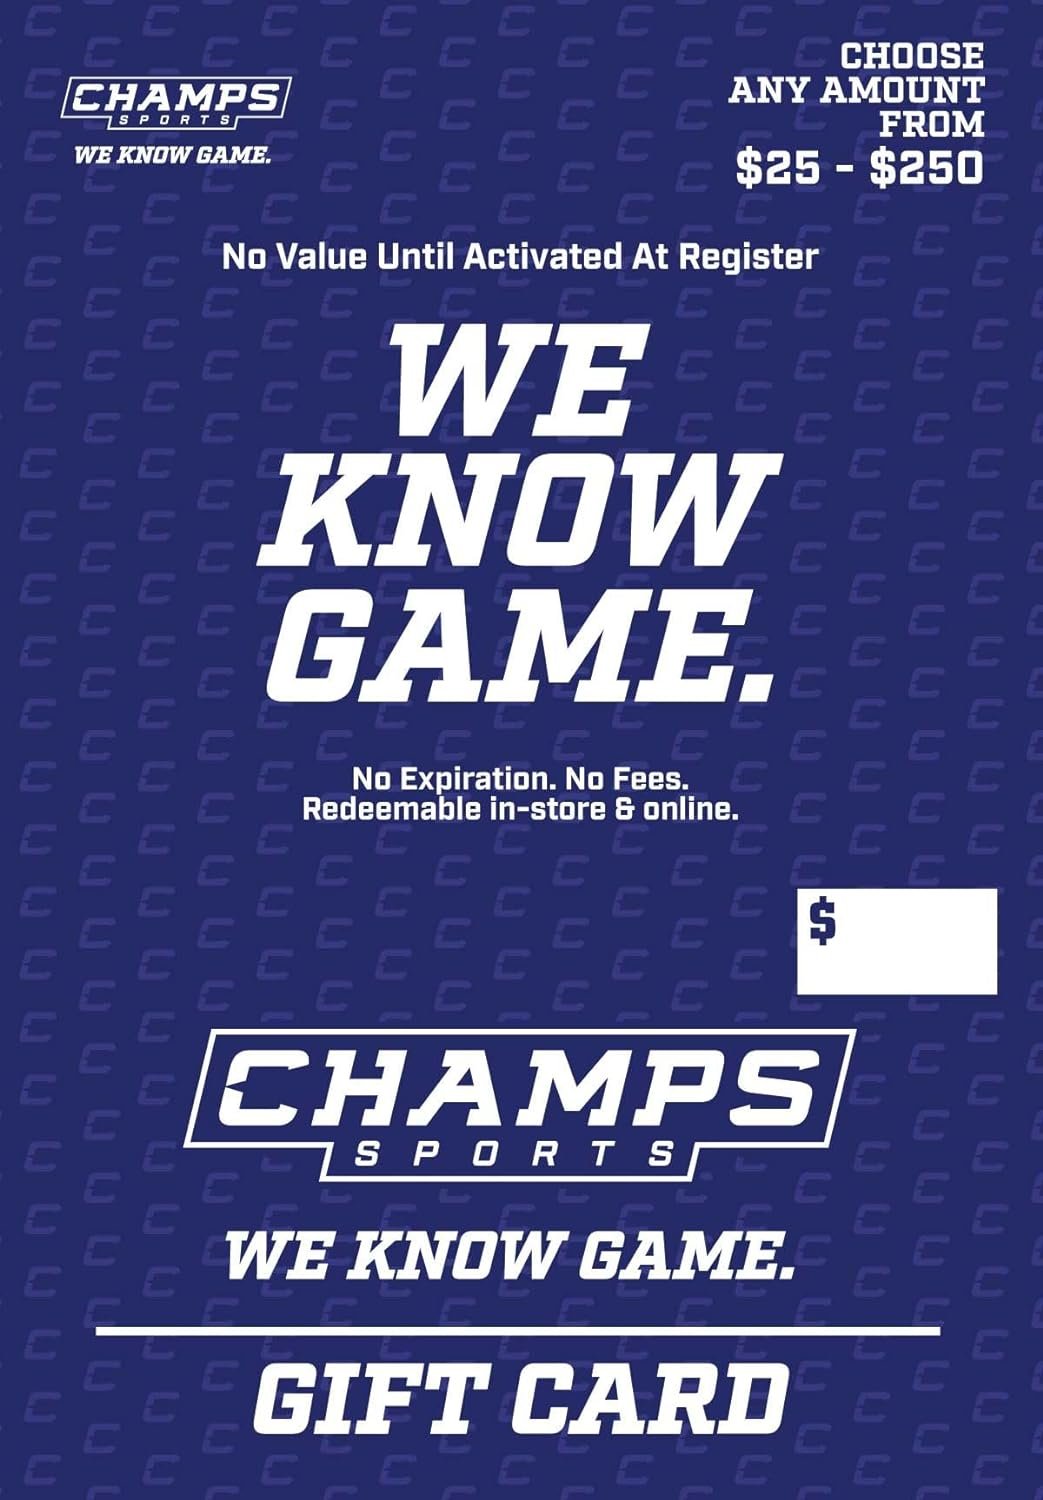 Champs Sports Gift Card Review